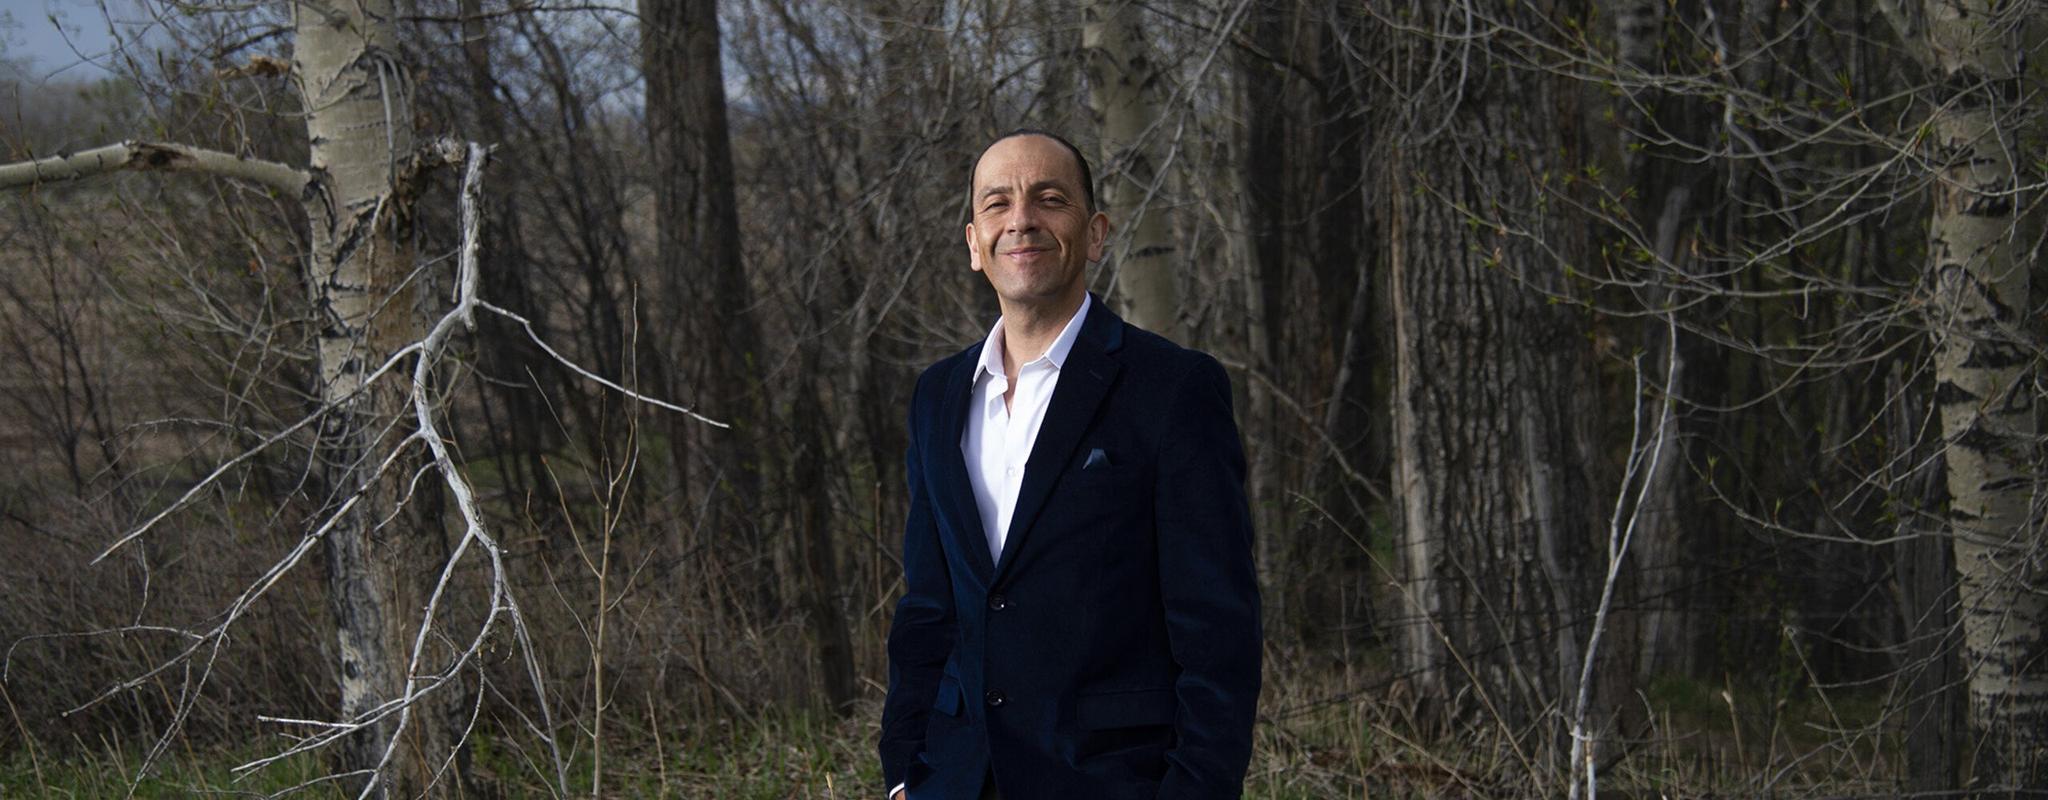 Shane Doyle stands proudly in a grassy forest. He's wearing smart grey suit trousers, a dark blue velvet blazer and a matching pocket square. His hands are in his pockets and he's smiling at the camera.